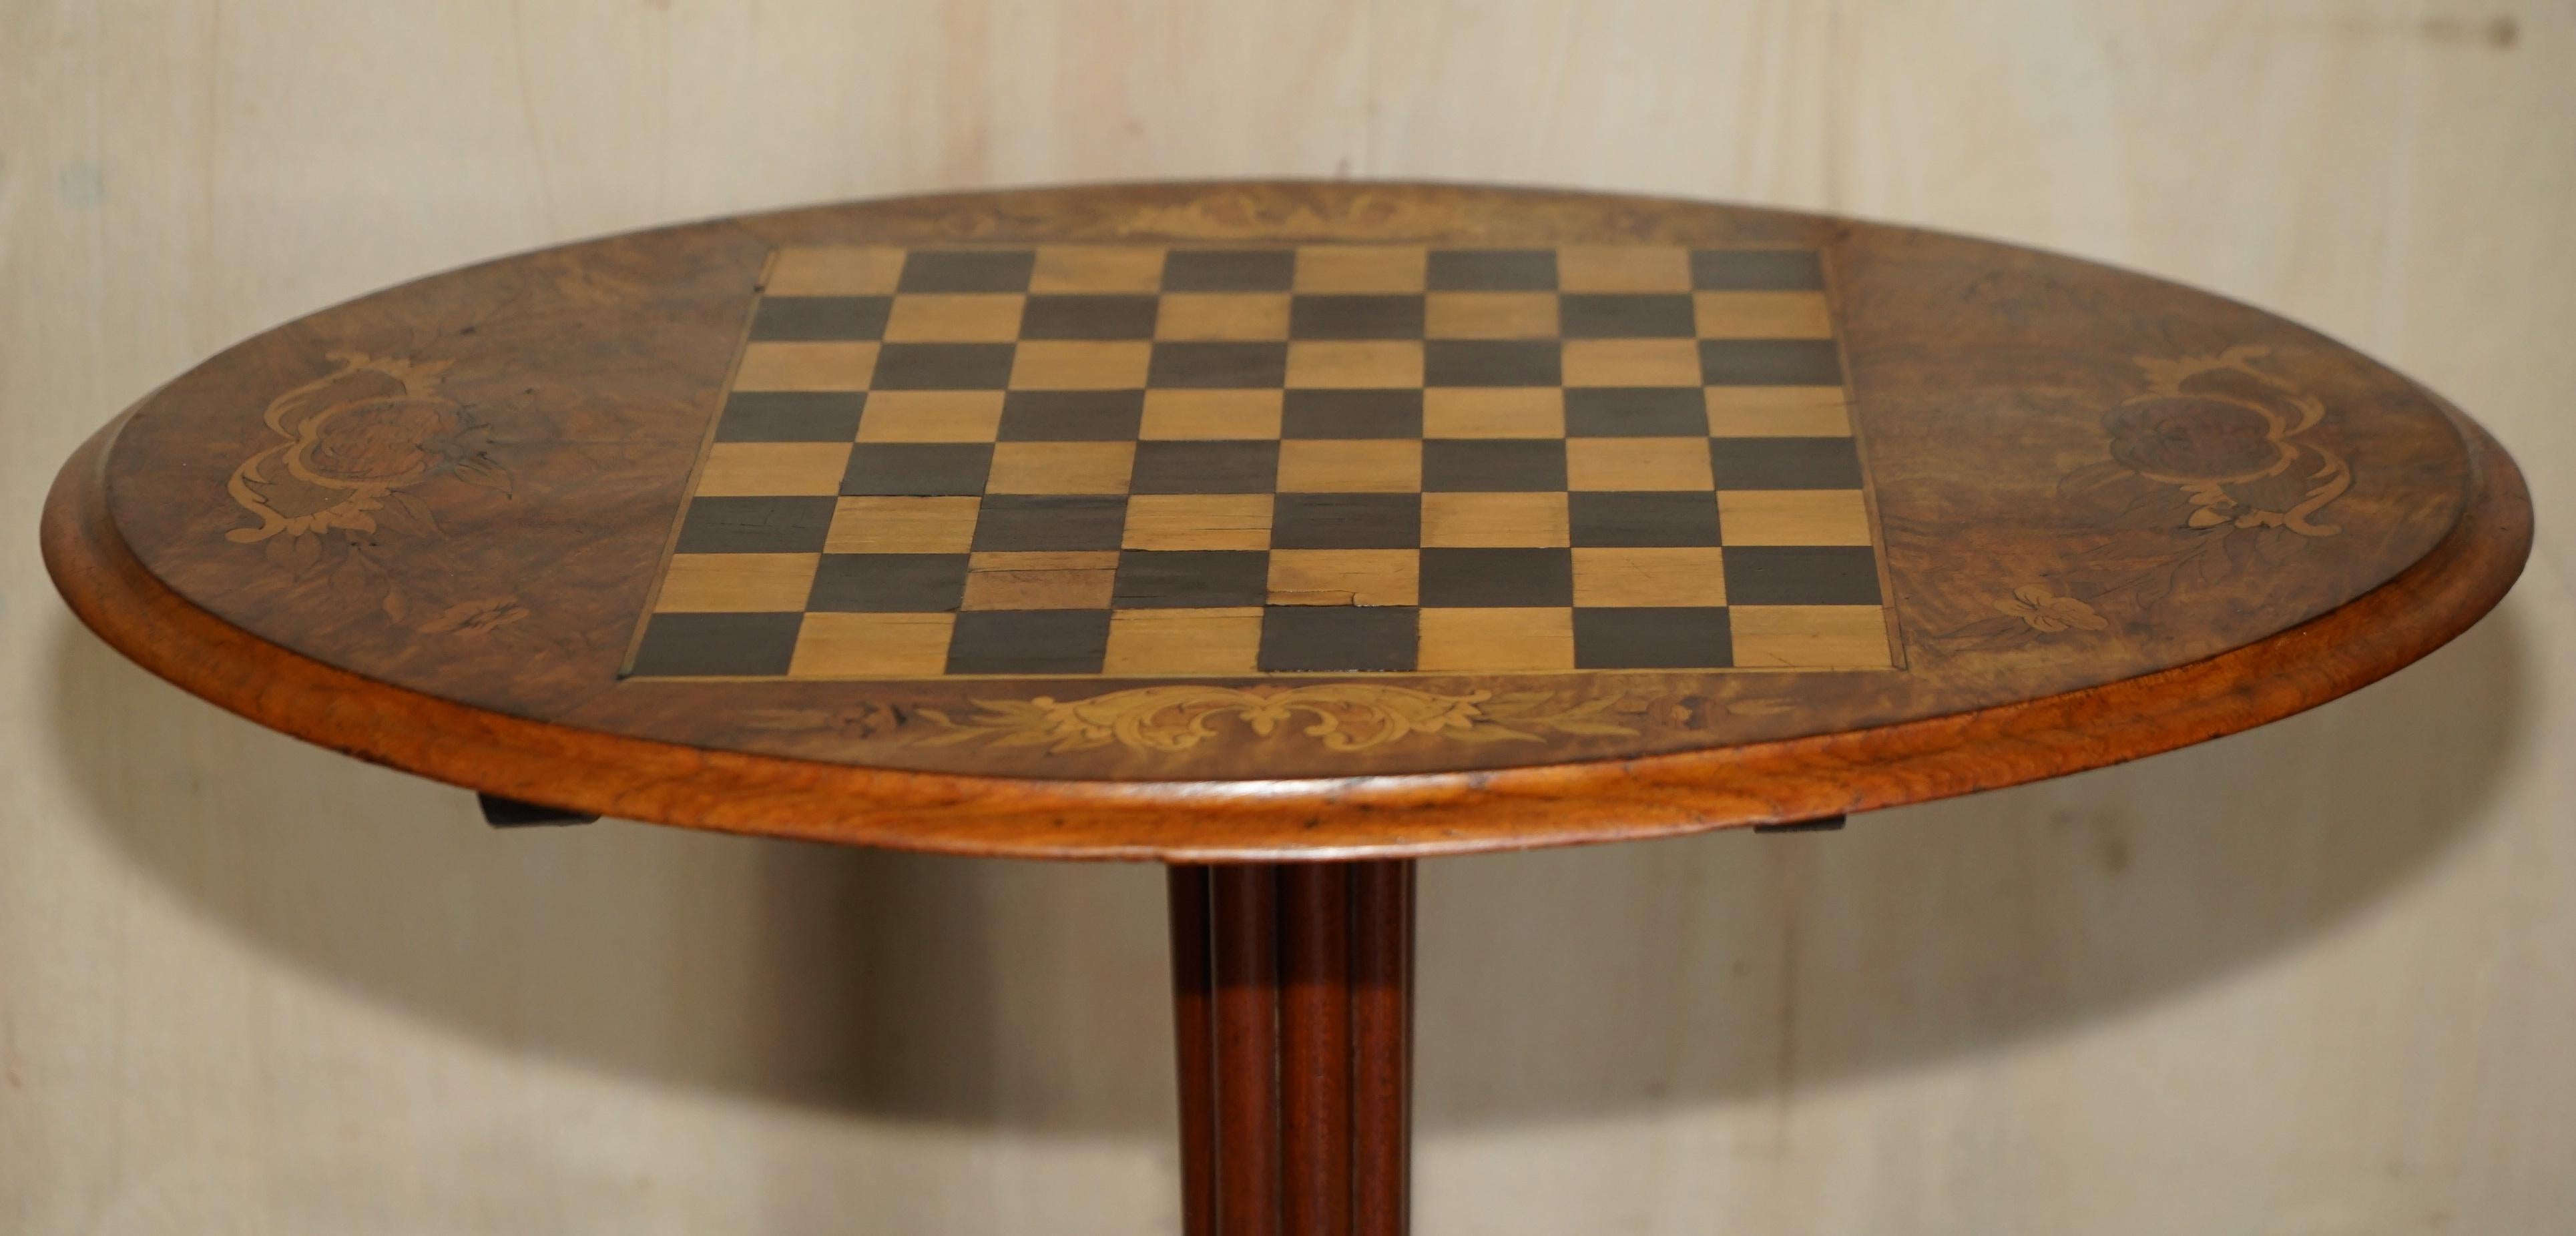 High Victorian Sublime Antique Victorian 1880 Tilt Top Chess Games Table with Marquetry Inlay